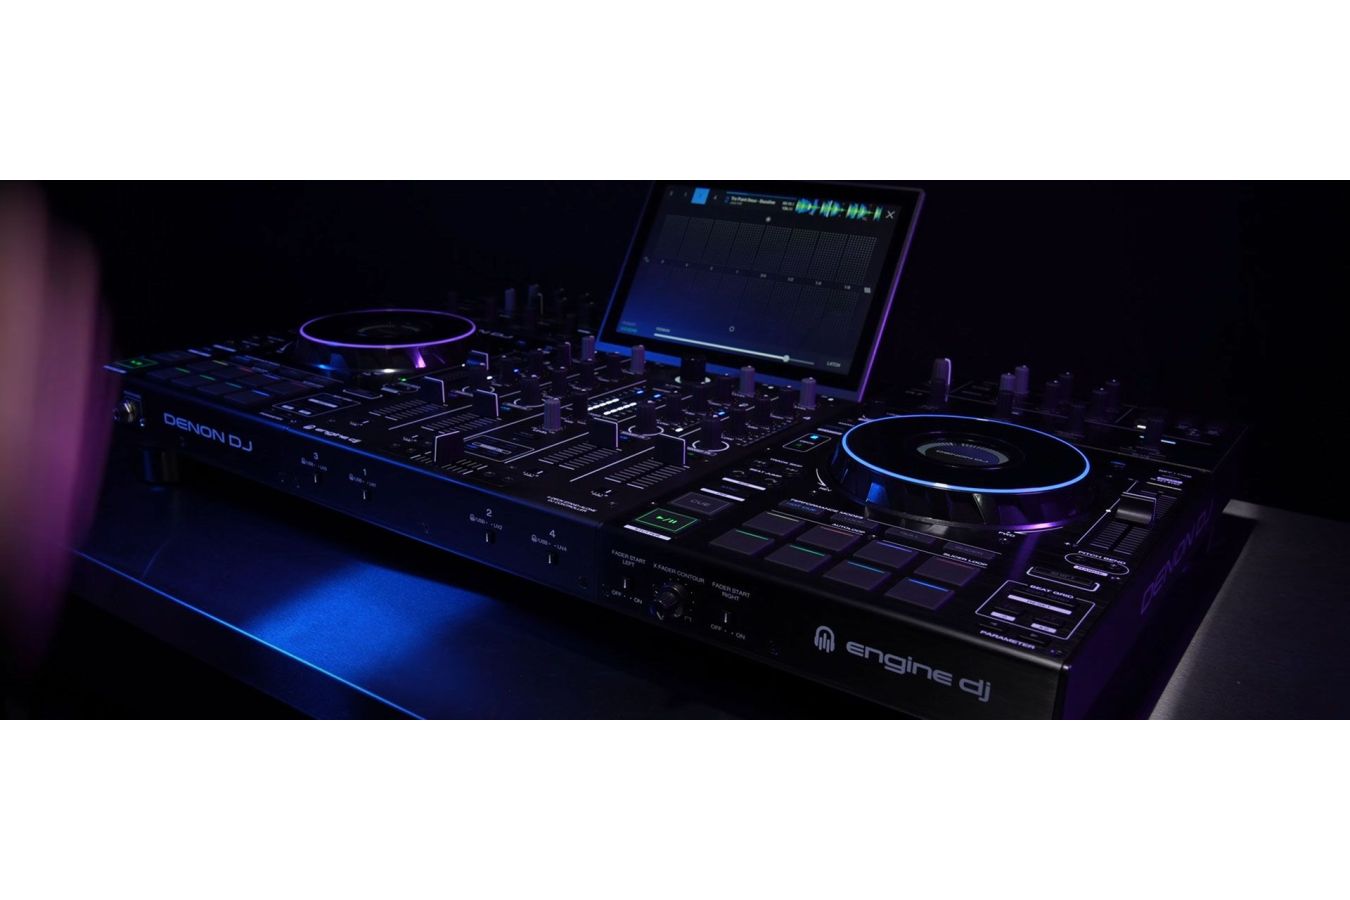 Engine DJ 3.2 Free Update Recently Announced!